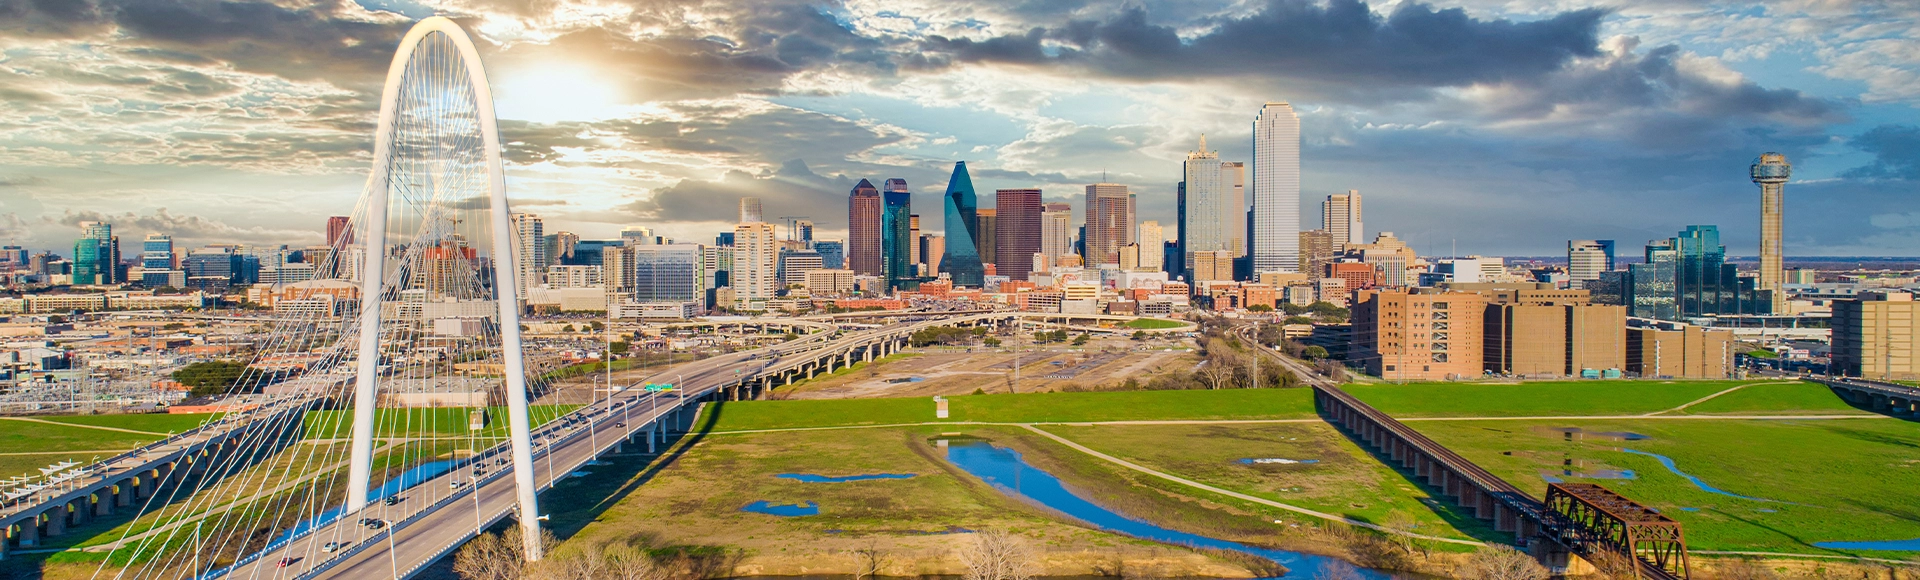 View of Dallas from Plano, Texas